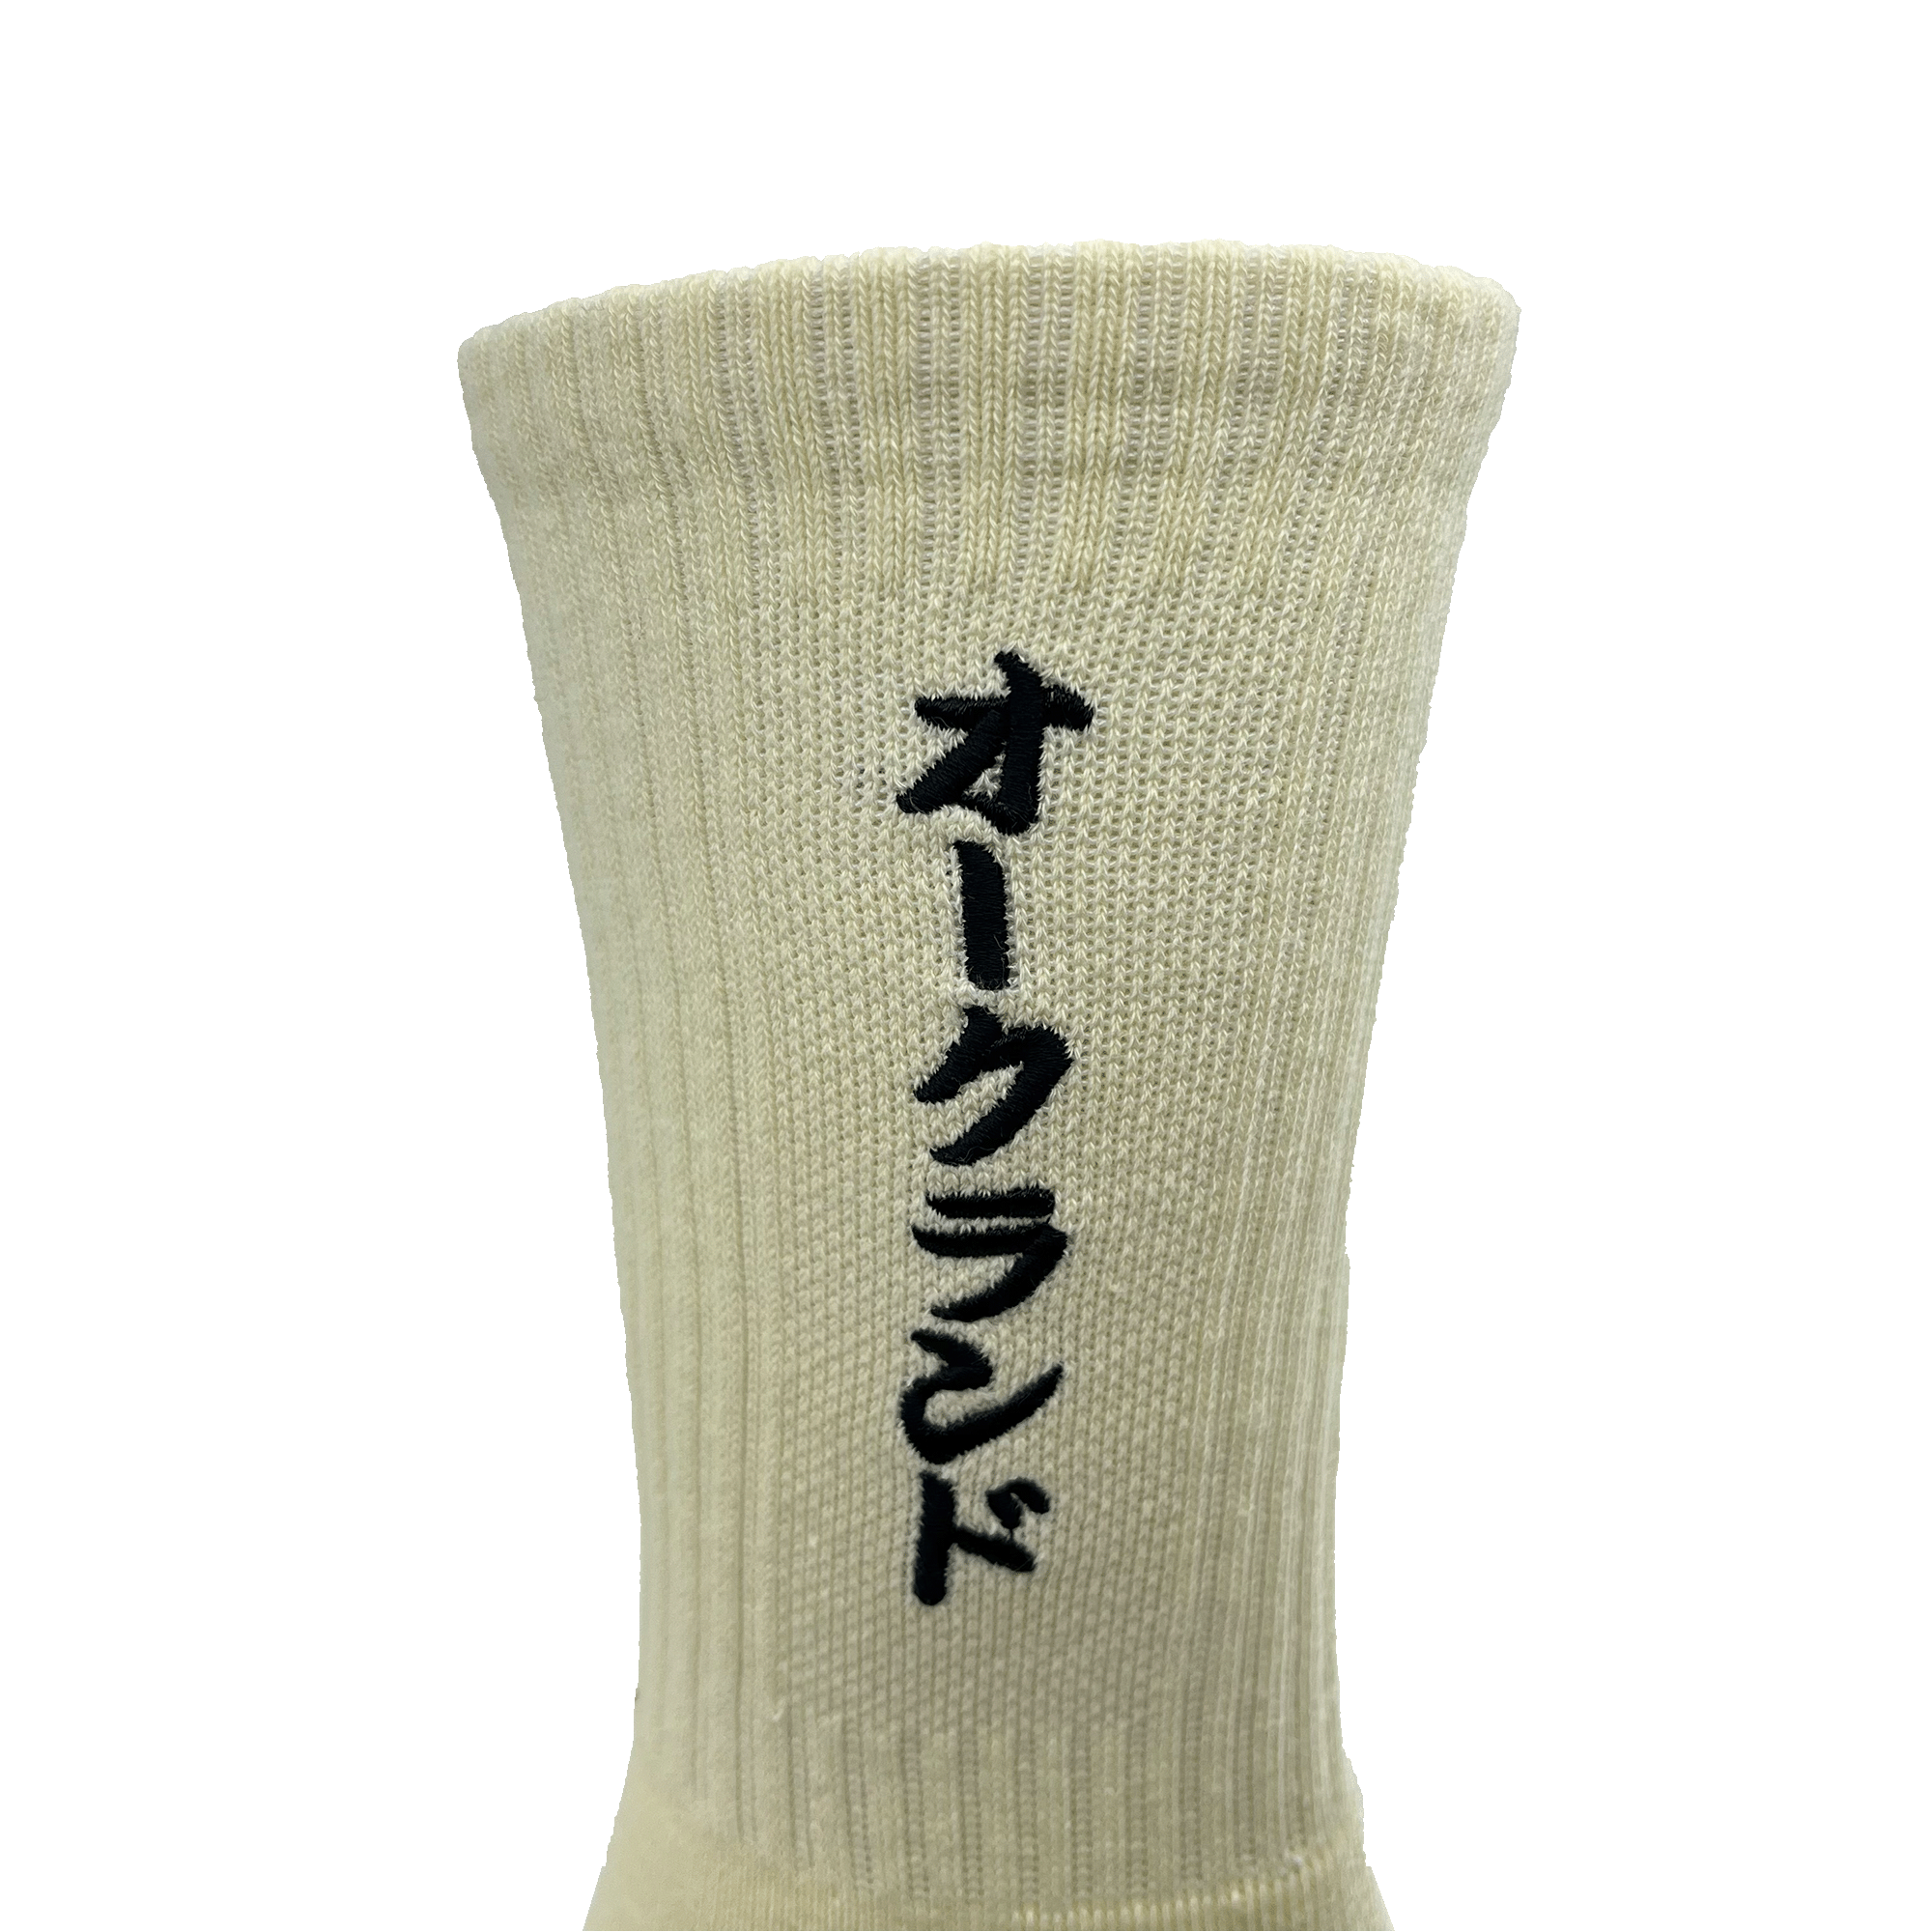 Close-up of embroidered white Kanji Japanese wordmark on the side of white crew sock.